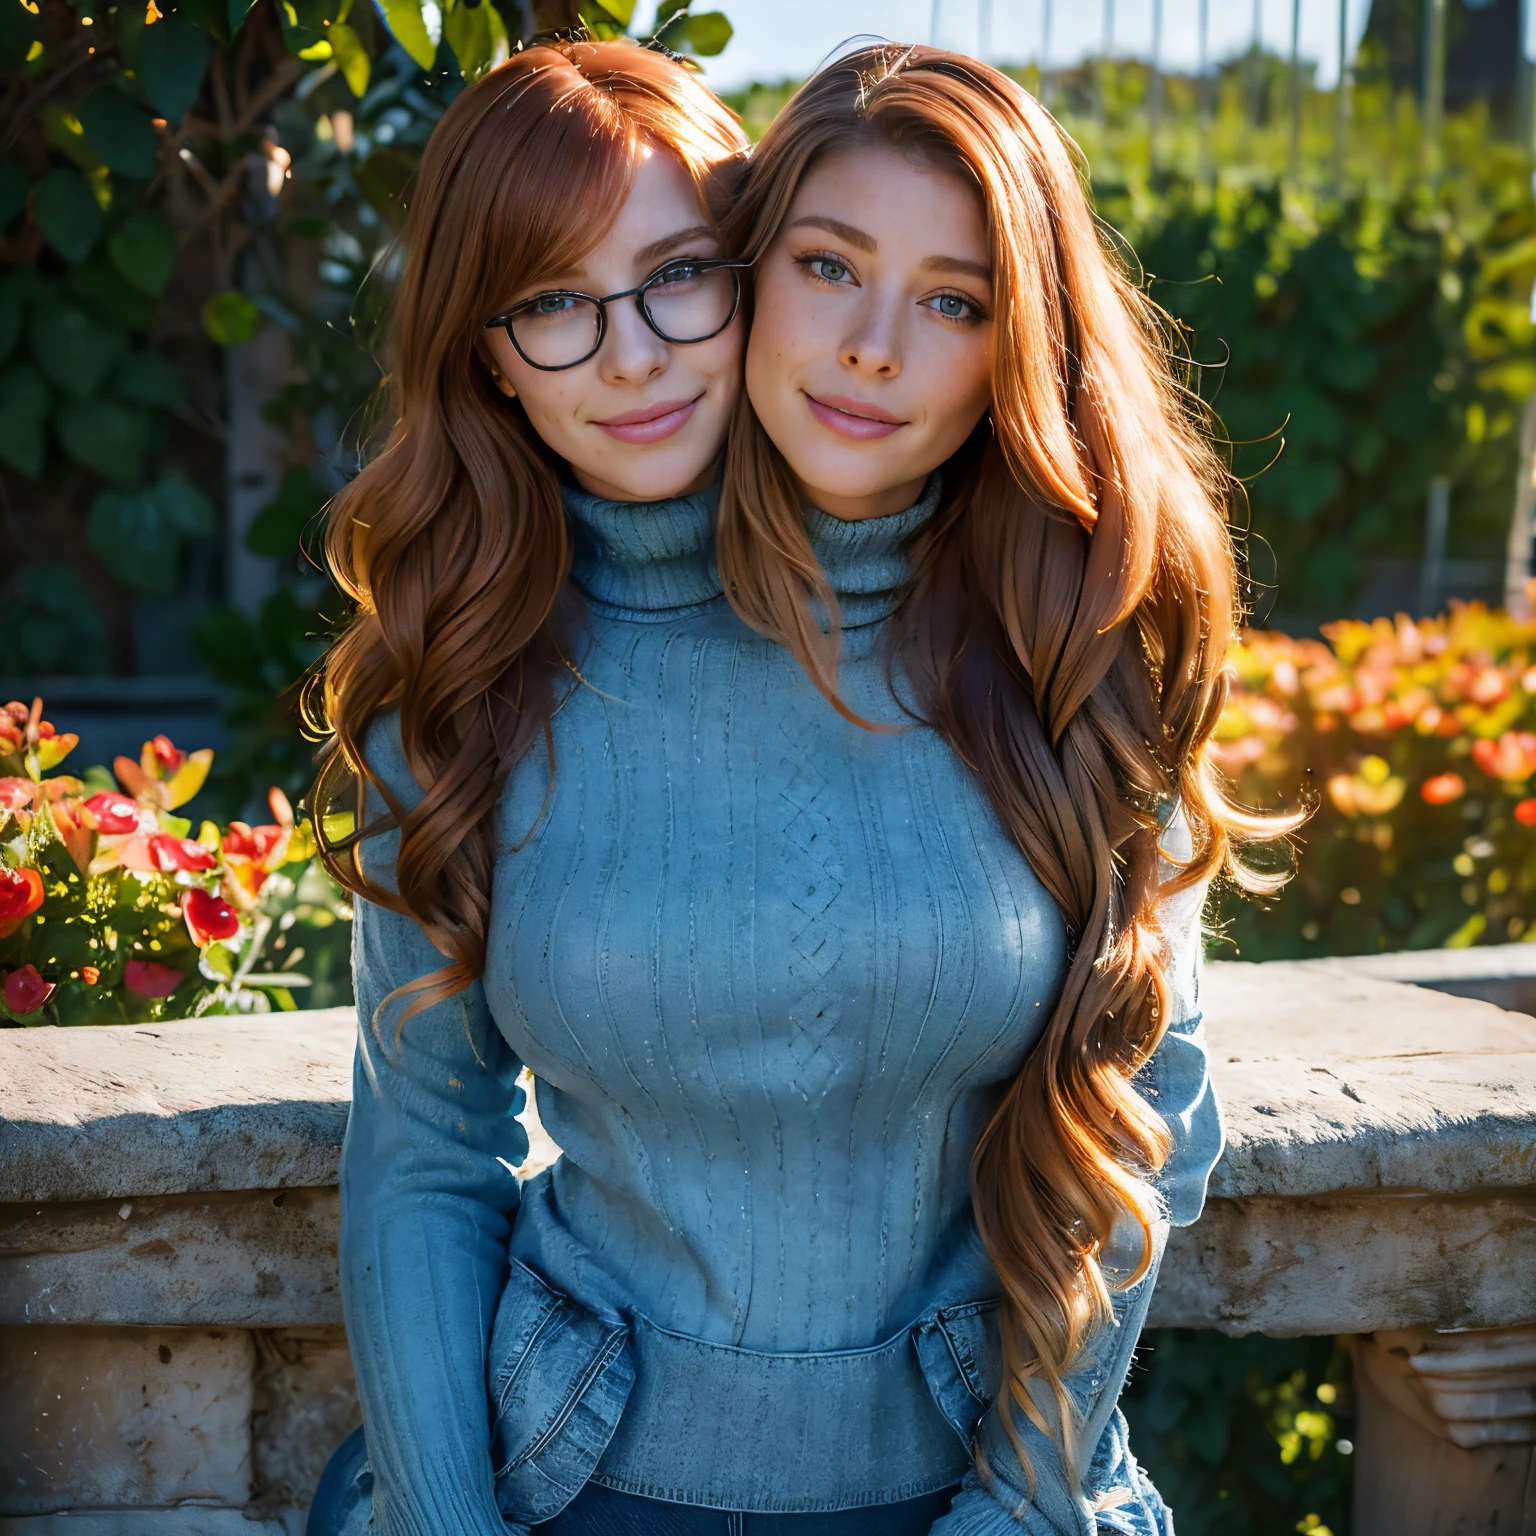 (((2heads))),(masterpiece, best quality:1.4), (modern days), thicc, obese,(full body shot), 1girl, solo, pov, sfw, stunning girlfriend, thick rimmed glasses, (standing:1.1), dynamic pose, (orange turtleneck oversized stretched turtleck sweater ,orange turtleneck knit sweater:1.4), (skinny white yoga pants, white yoga pants: 1.4), (((big bulge))),(denim jacket: 1.4), (long blonde hair), long curly red hair,bangs, heart-shaped face, elegant face, beautiful face, freckles, high detail face, high detail skin, skin pores, subsurface scattering, (blue eye details), realistic pupils, droopy breasts, loving smile, looking at the audience, full blush, plump lips, holding a watermelon, centered, , at a vegetable garden in her backyard in a typical american suburban neighborhood,  wind, detailed background, depth of field, Atmospheric perspective, volumetric lighting, clear focus, absurd, realistic proportions, good anatomy, (realistic, hyper-realistic:1.4), 16k HDR,